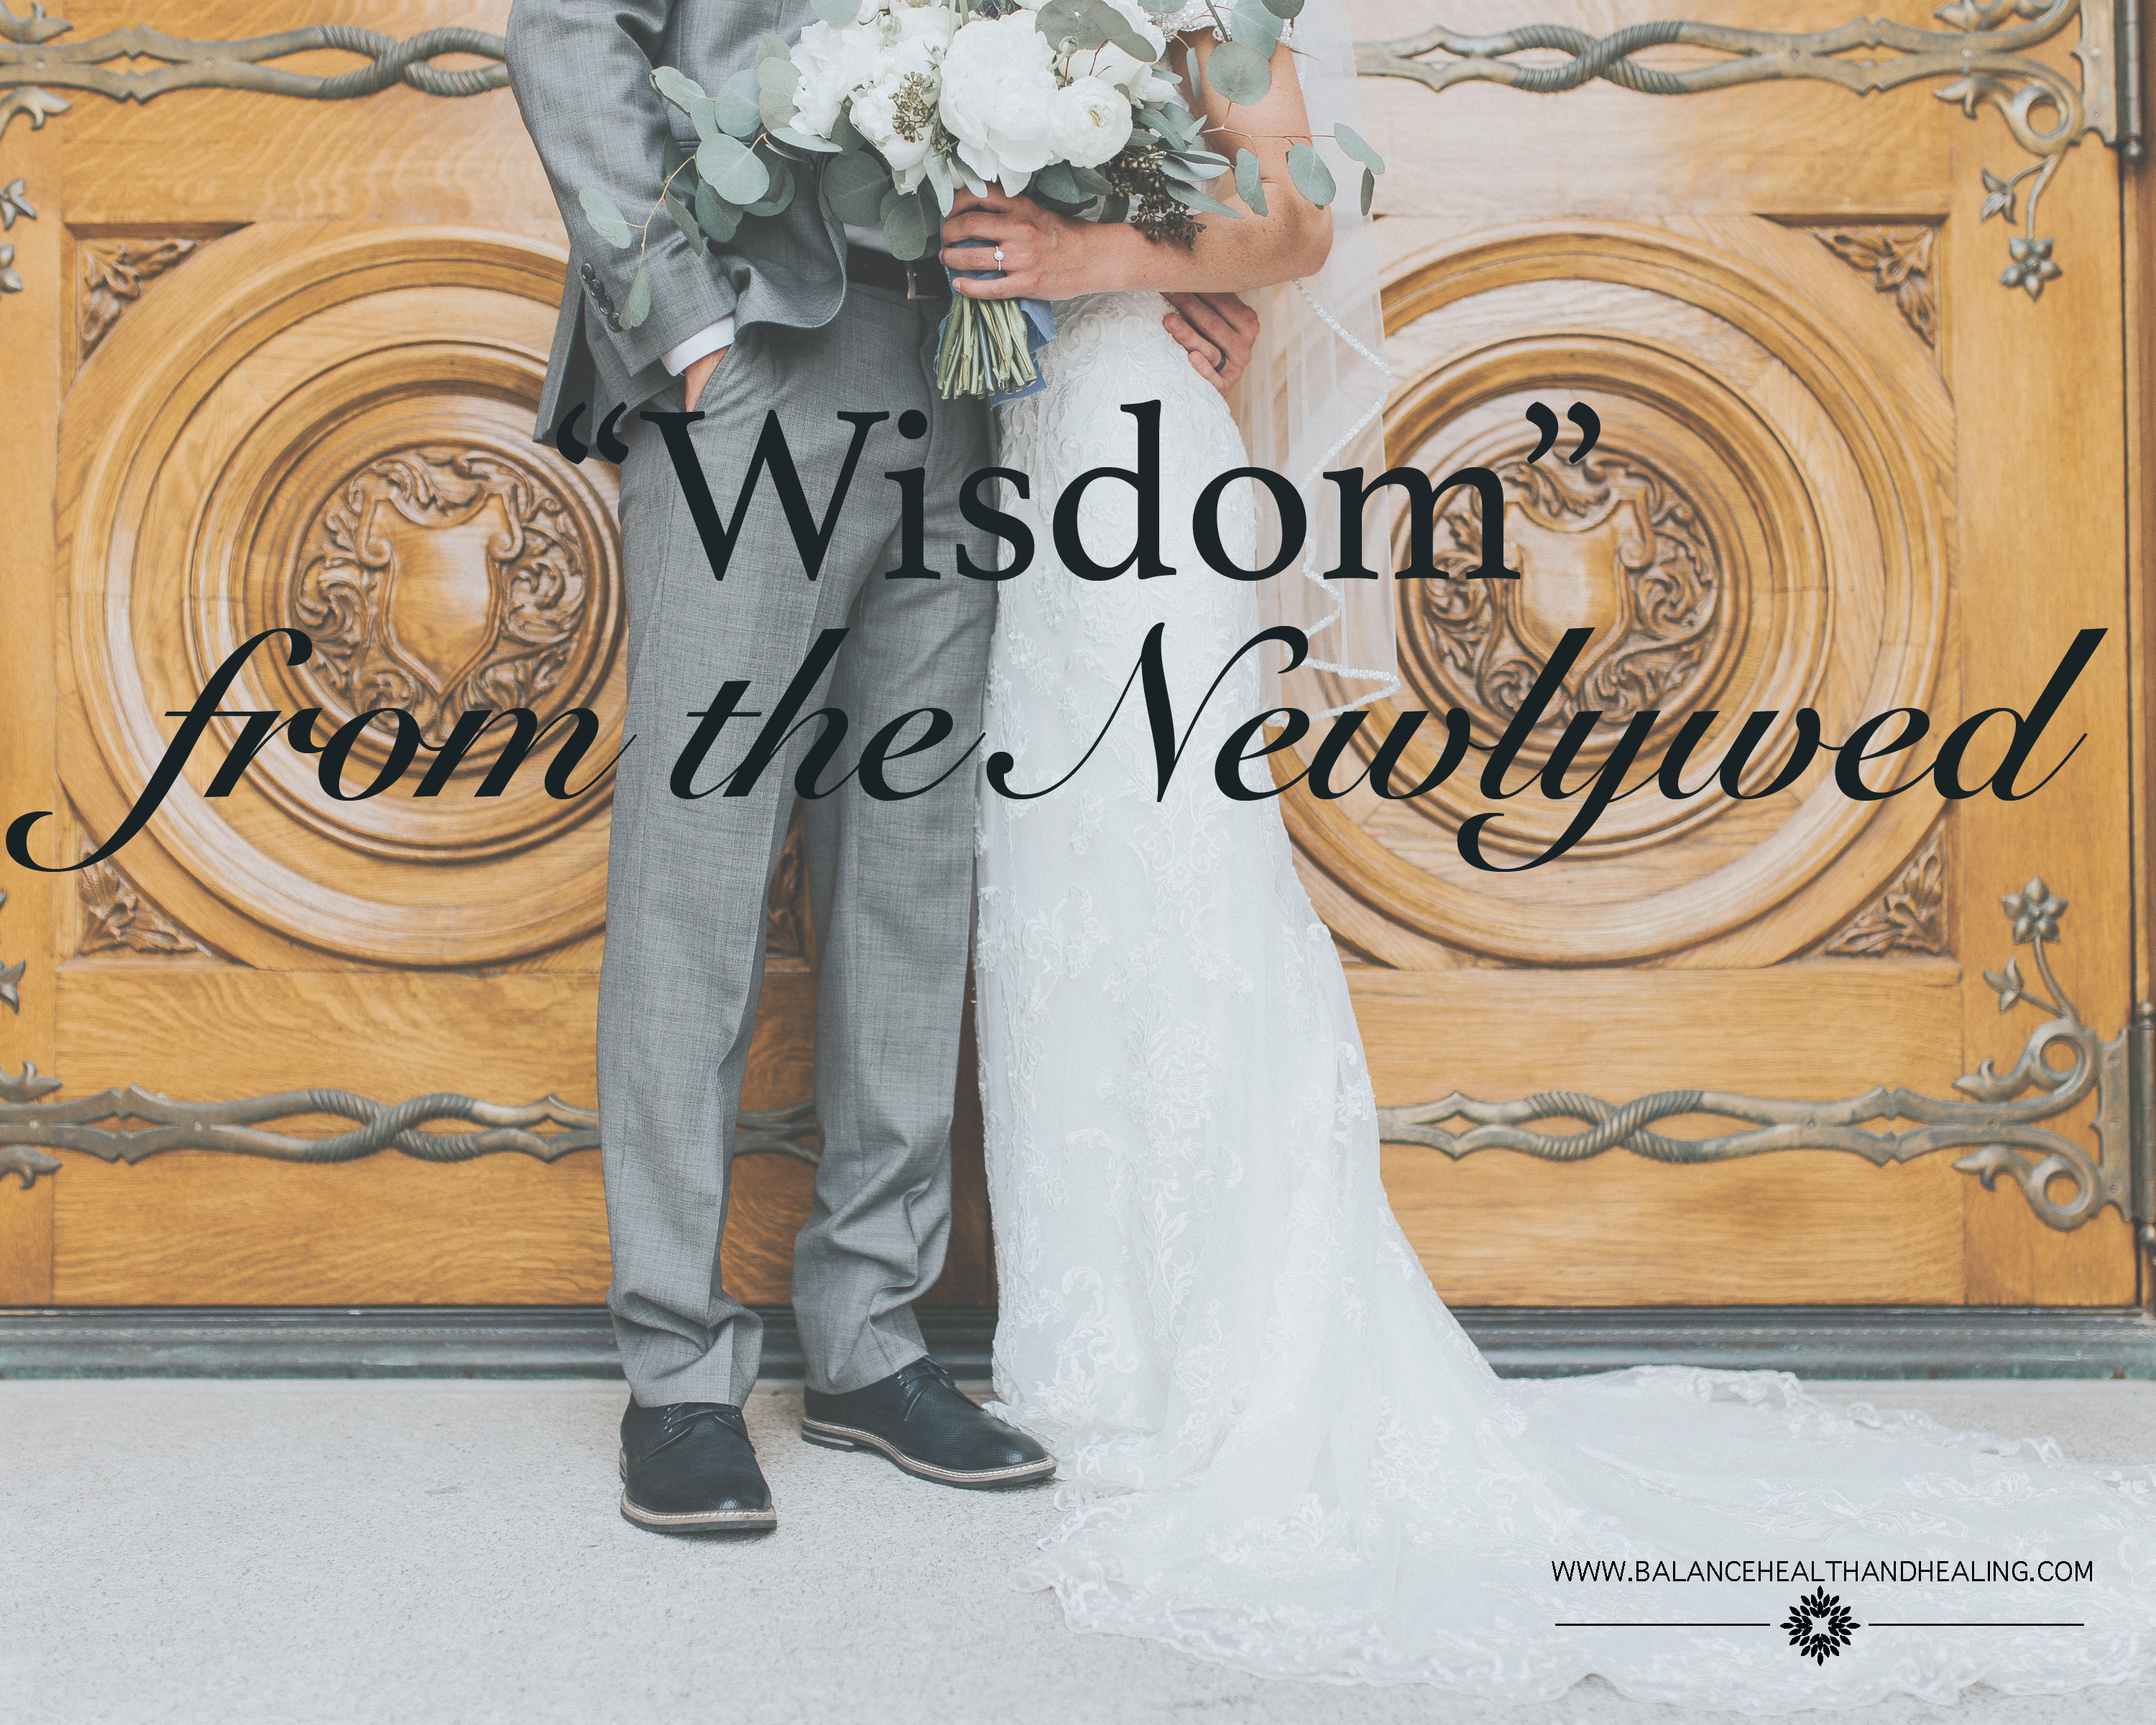 “Wisdom” from the Newlywed